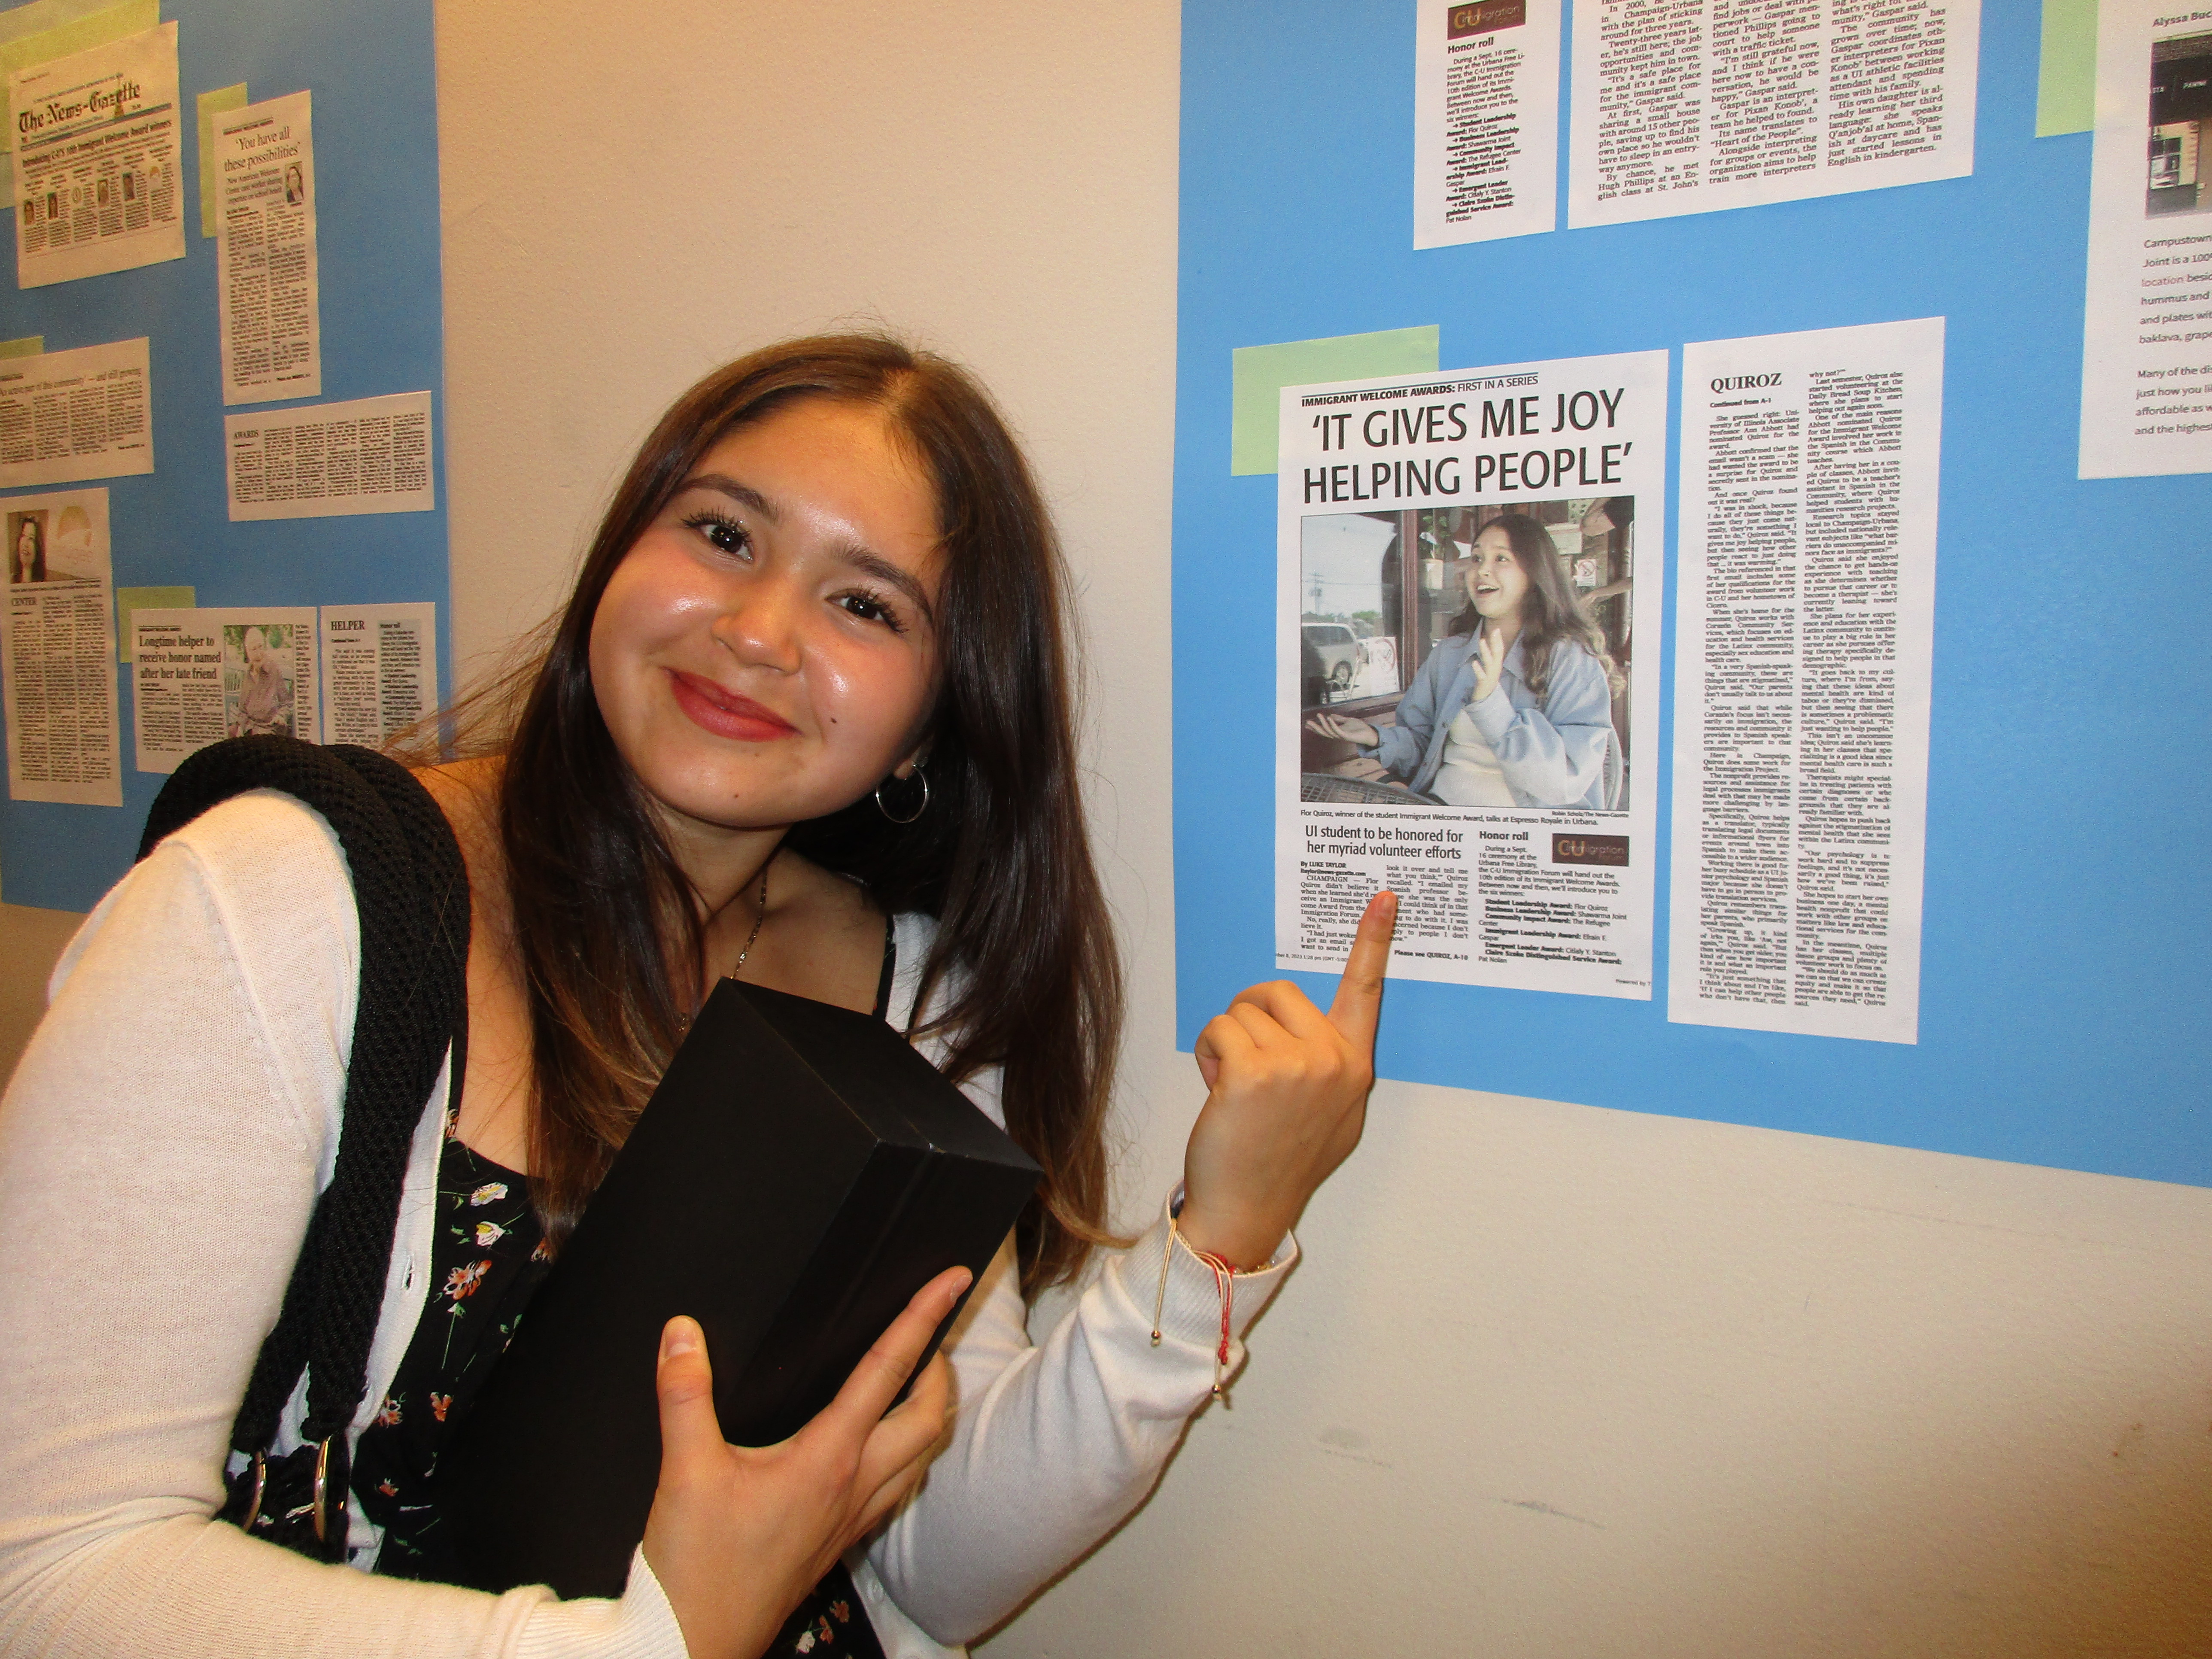 Flor Quiroz poses next to clipping of her News Gazette article